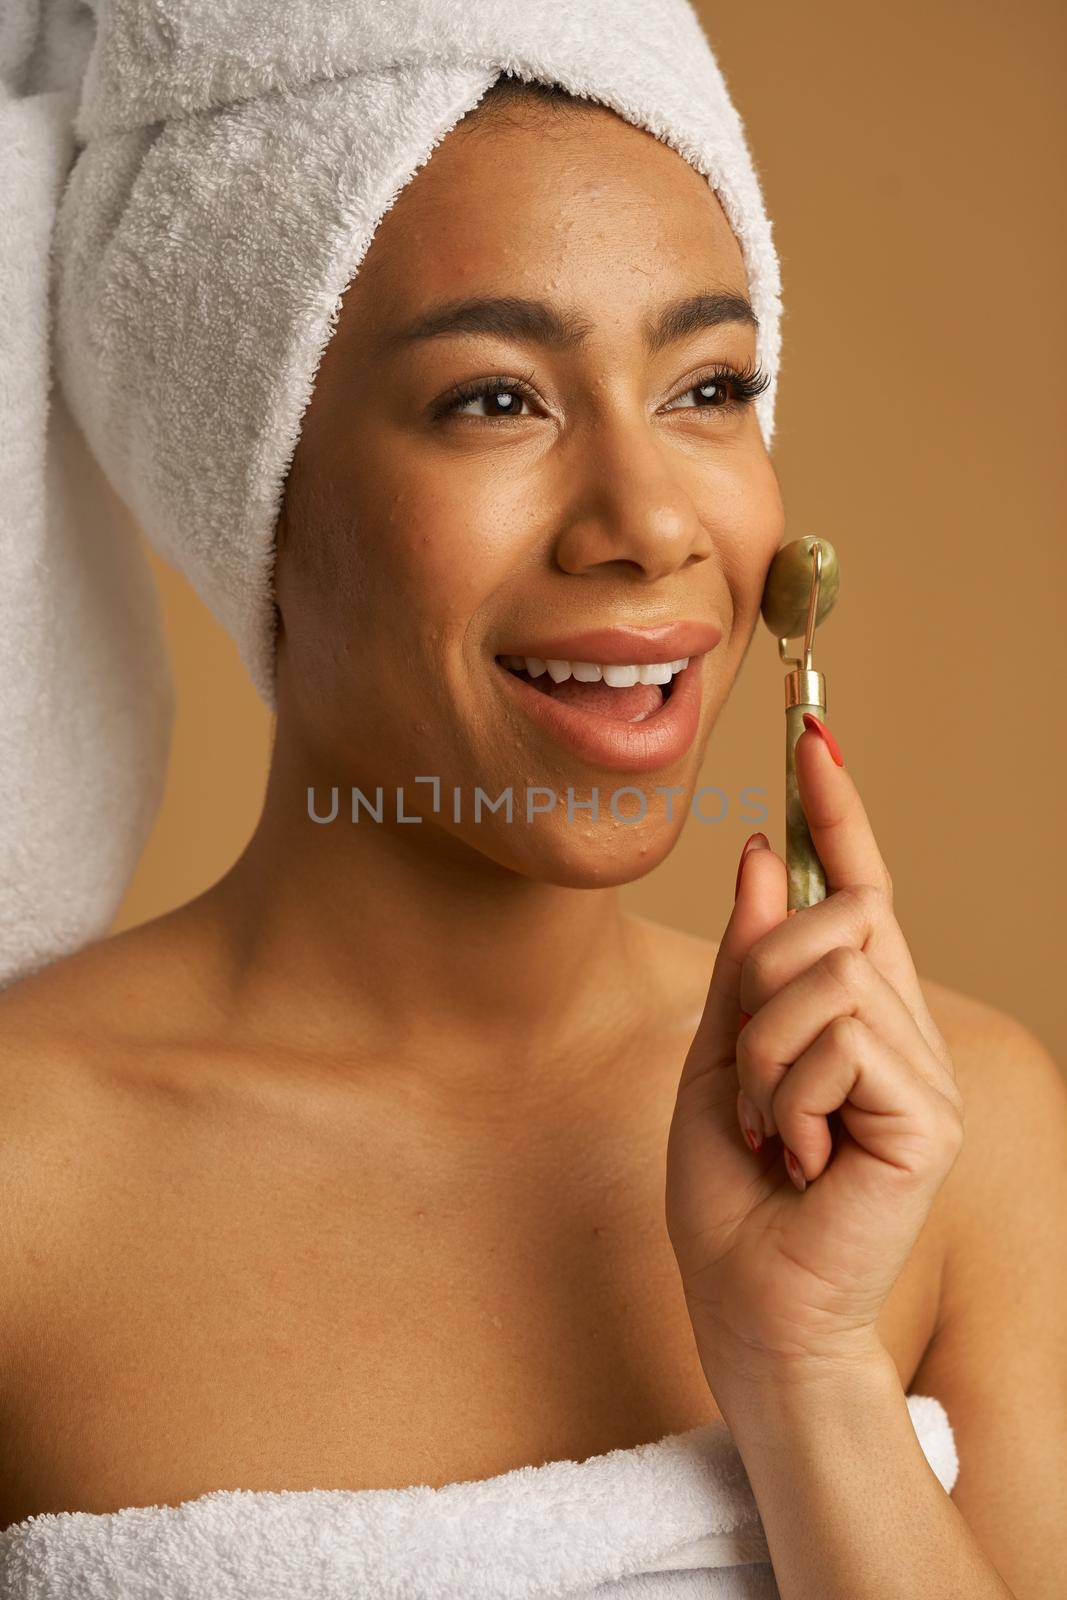 Portrait of happy young woman after shower smiling while using jade roller for massaging her face isolated over beige background by friendsstock